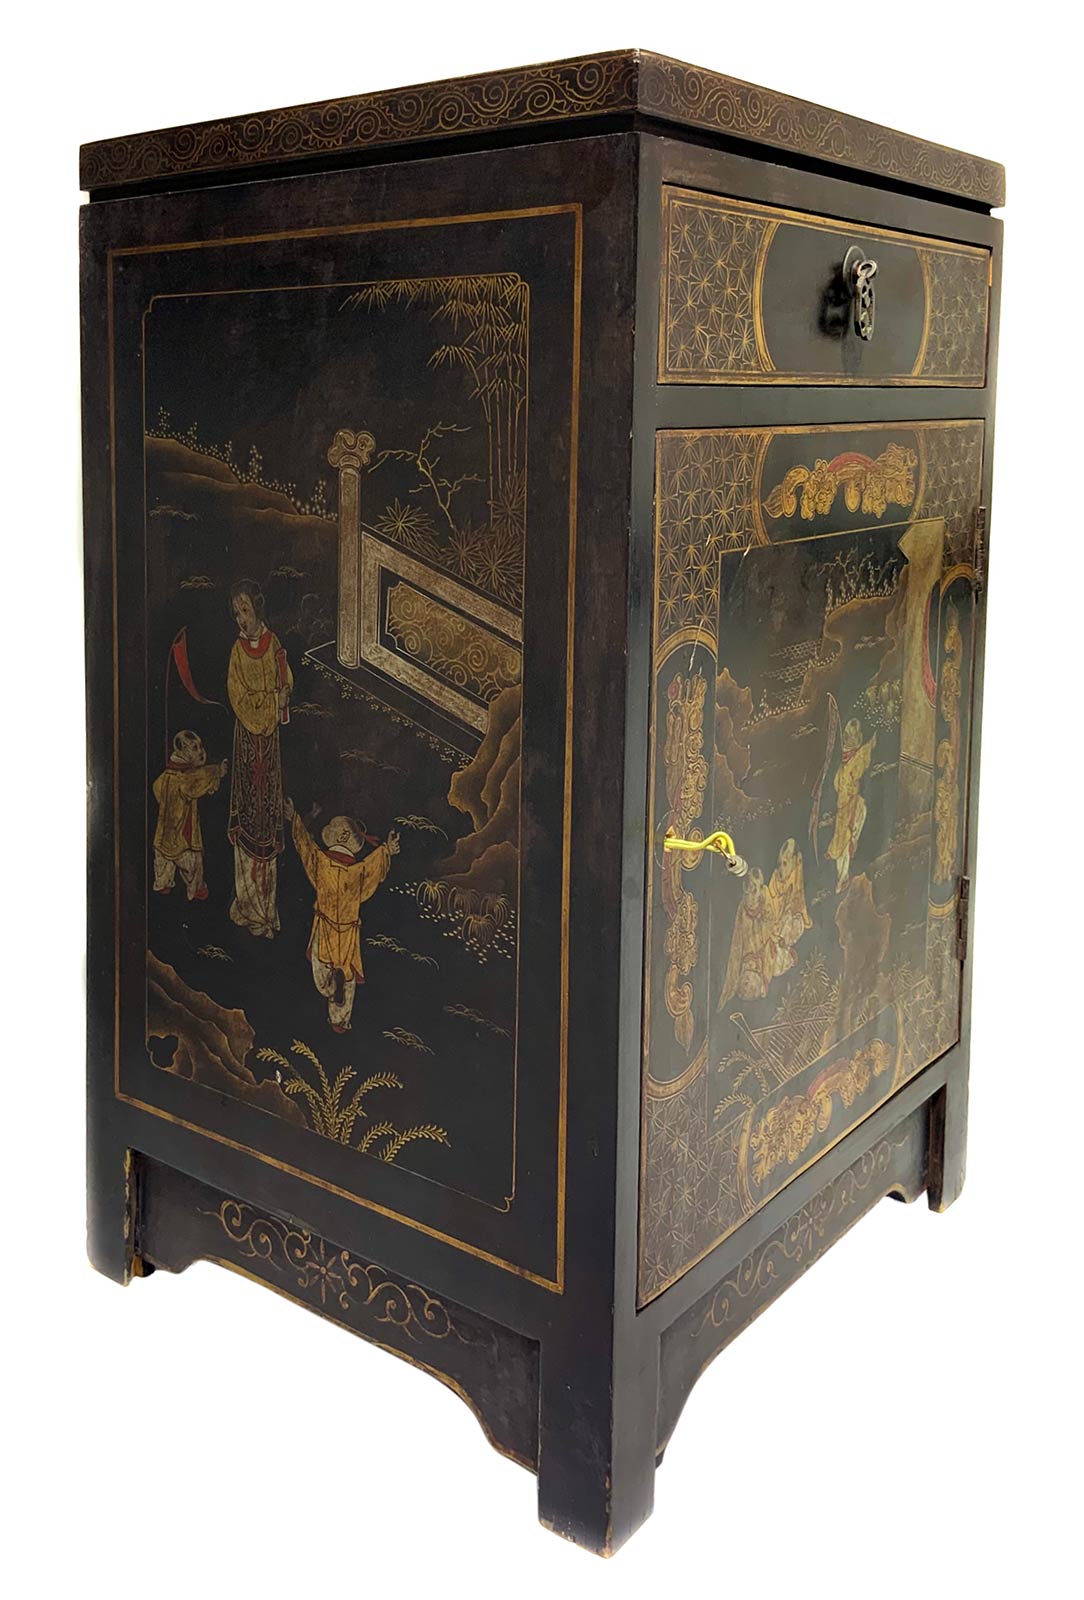 Chinese lacquered cabinet with genre scenes. 40s. H 63 Cm, Cm 40x35 - Image 4 of 6